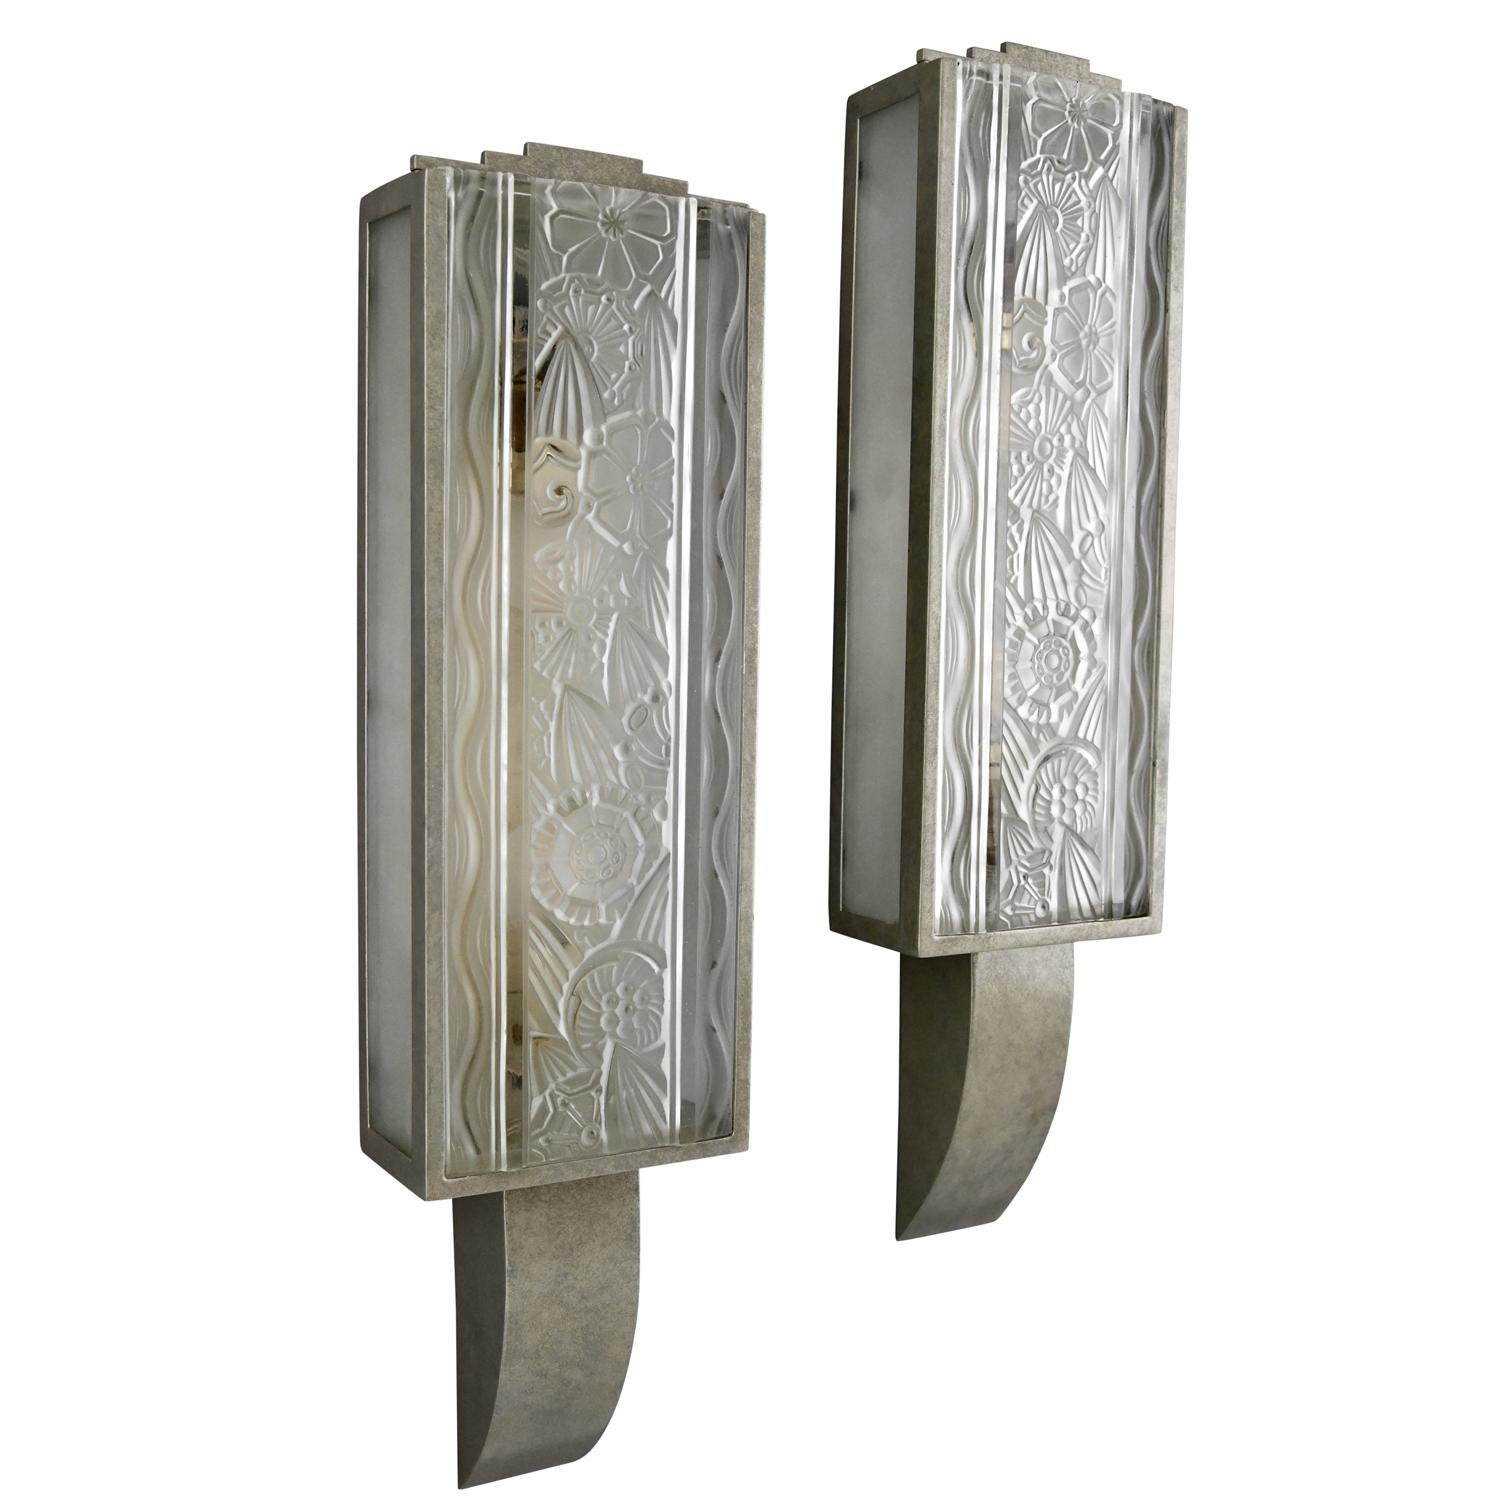 Pair of Art Deco wall sconces signed by Hettier & Vincent
Marked Made in France. Frosted glass panels with pattern of stylized flowers produced by Baccarat. 
Bronze frames, old silver patina. 

About Hettier & Vincent:
The association between the